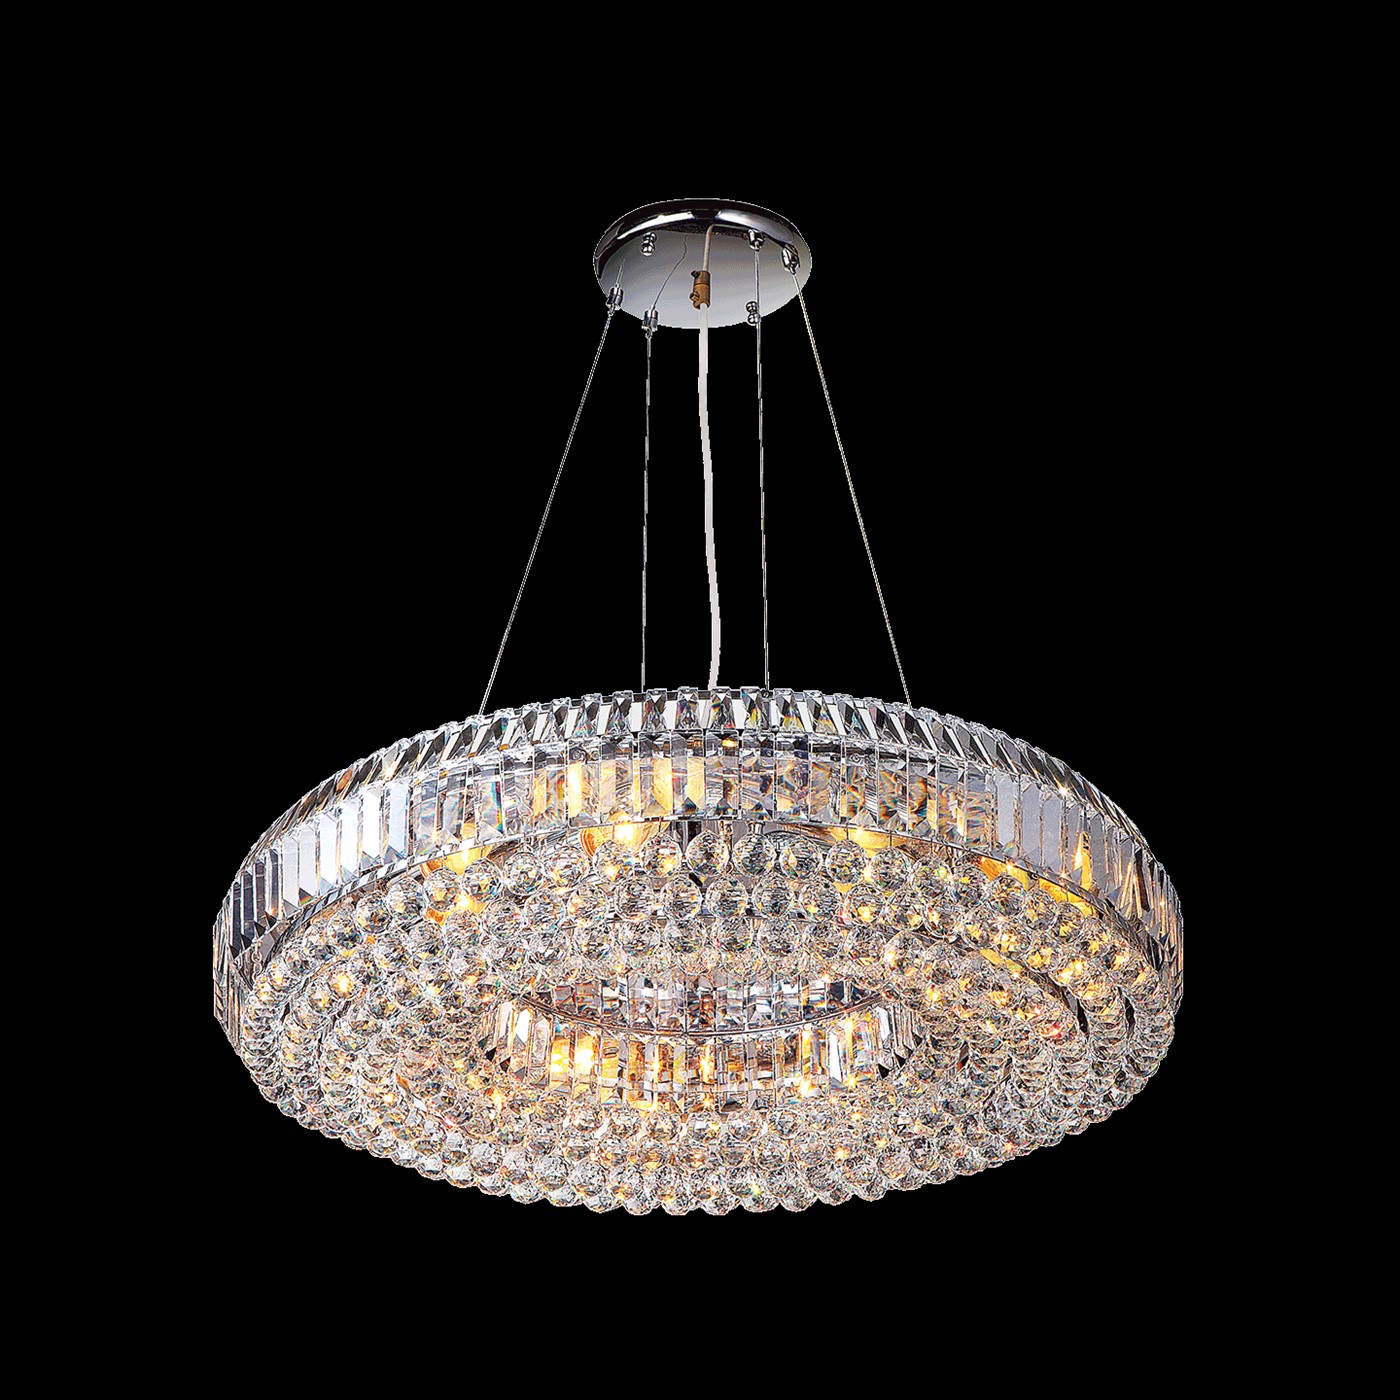 Jaquar Digest chandelier with asfour almaaza crysta